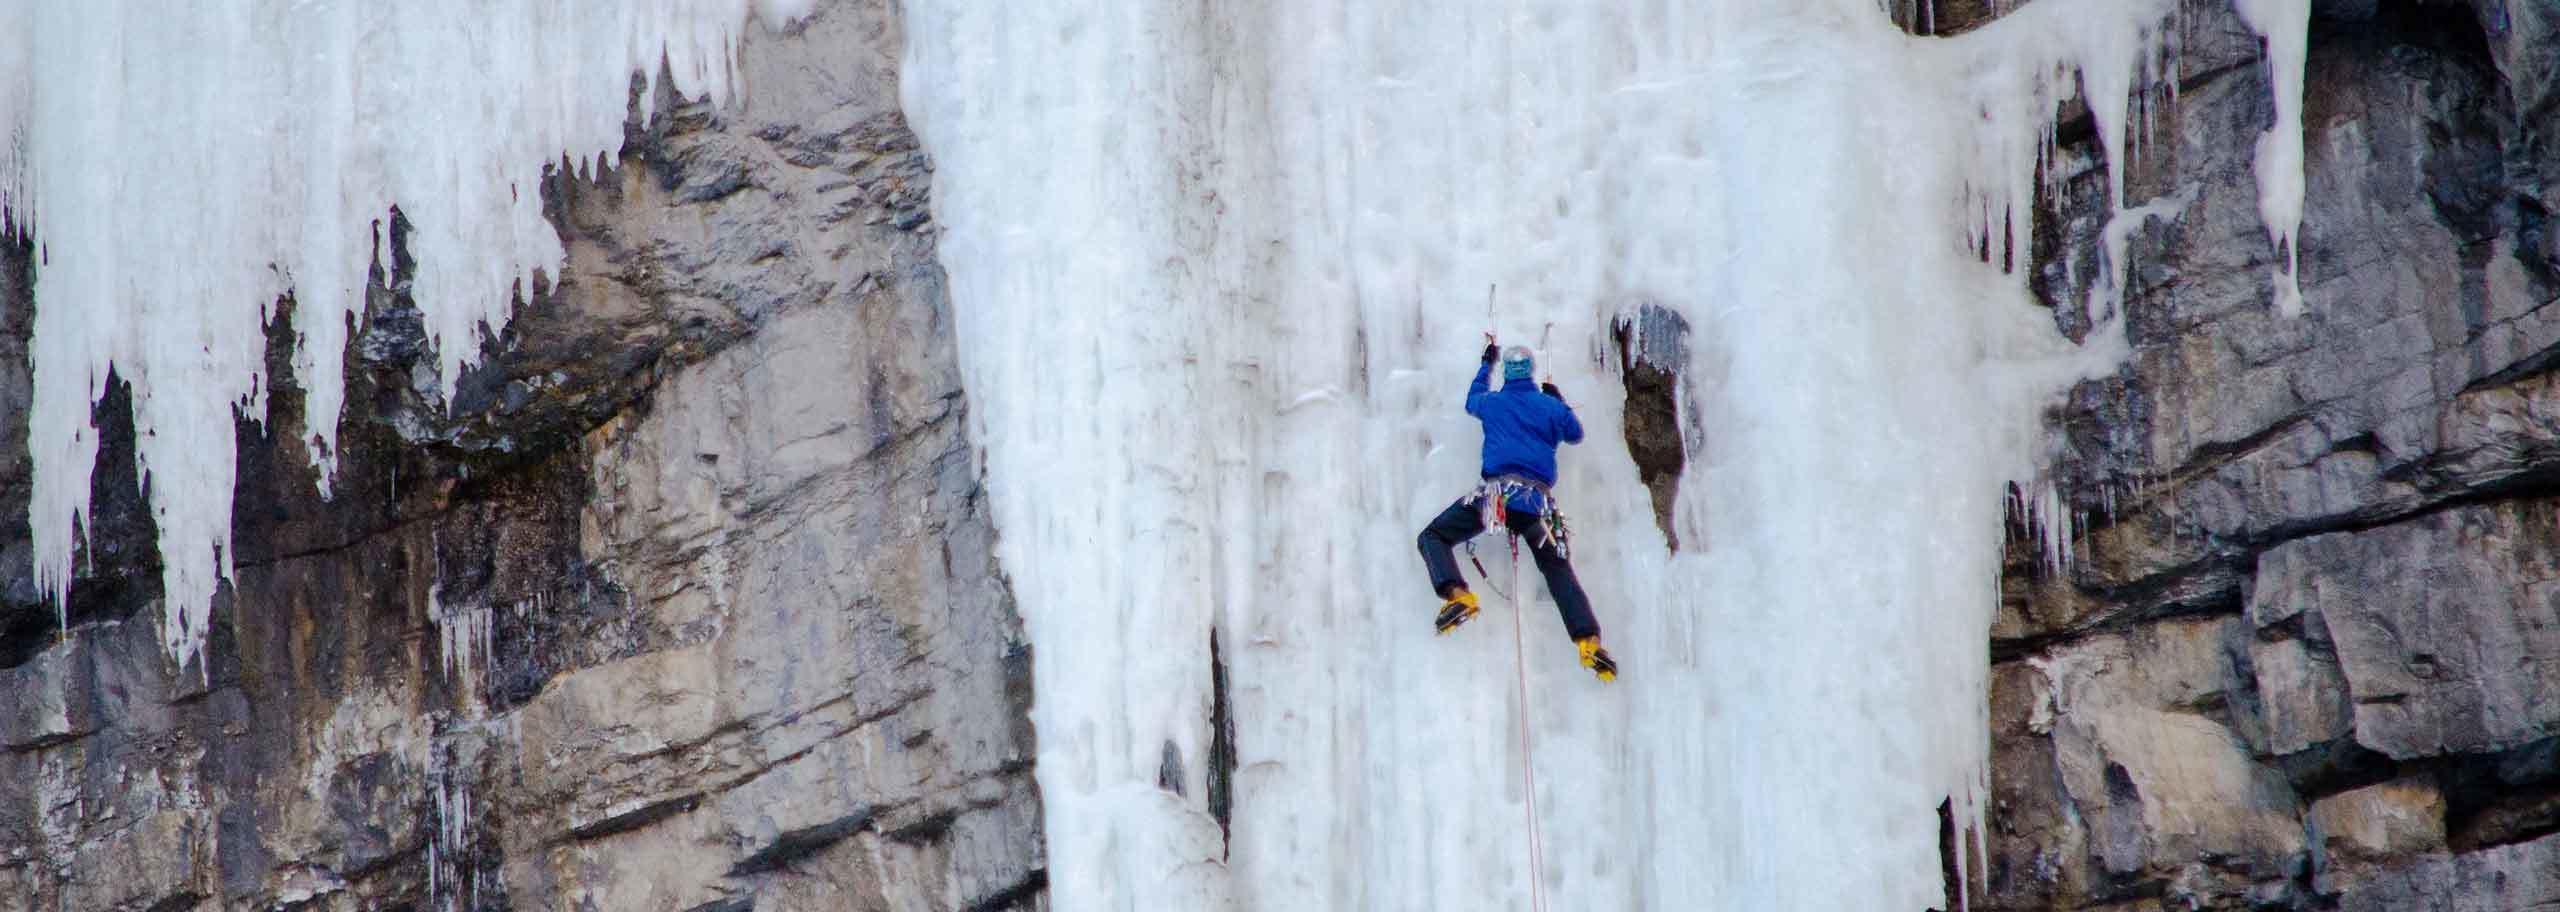 Ice Climbing in Monte Rosa, Courses & Multi-pitch Routes